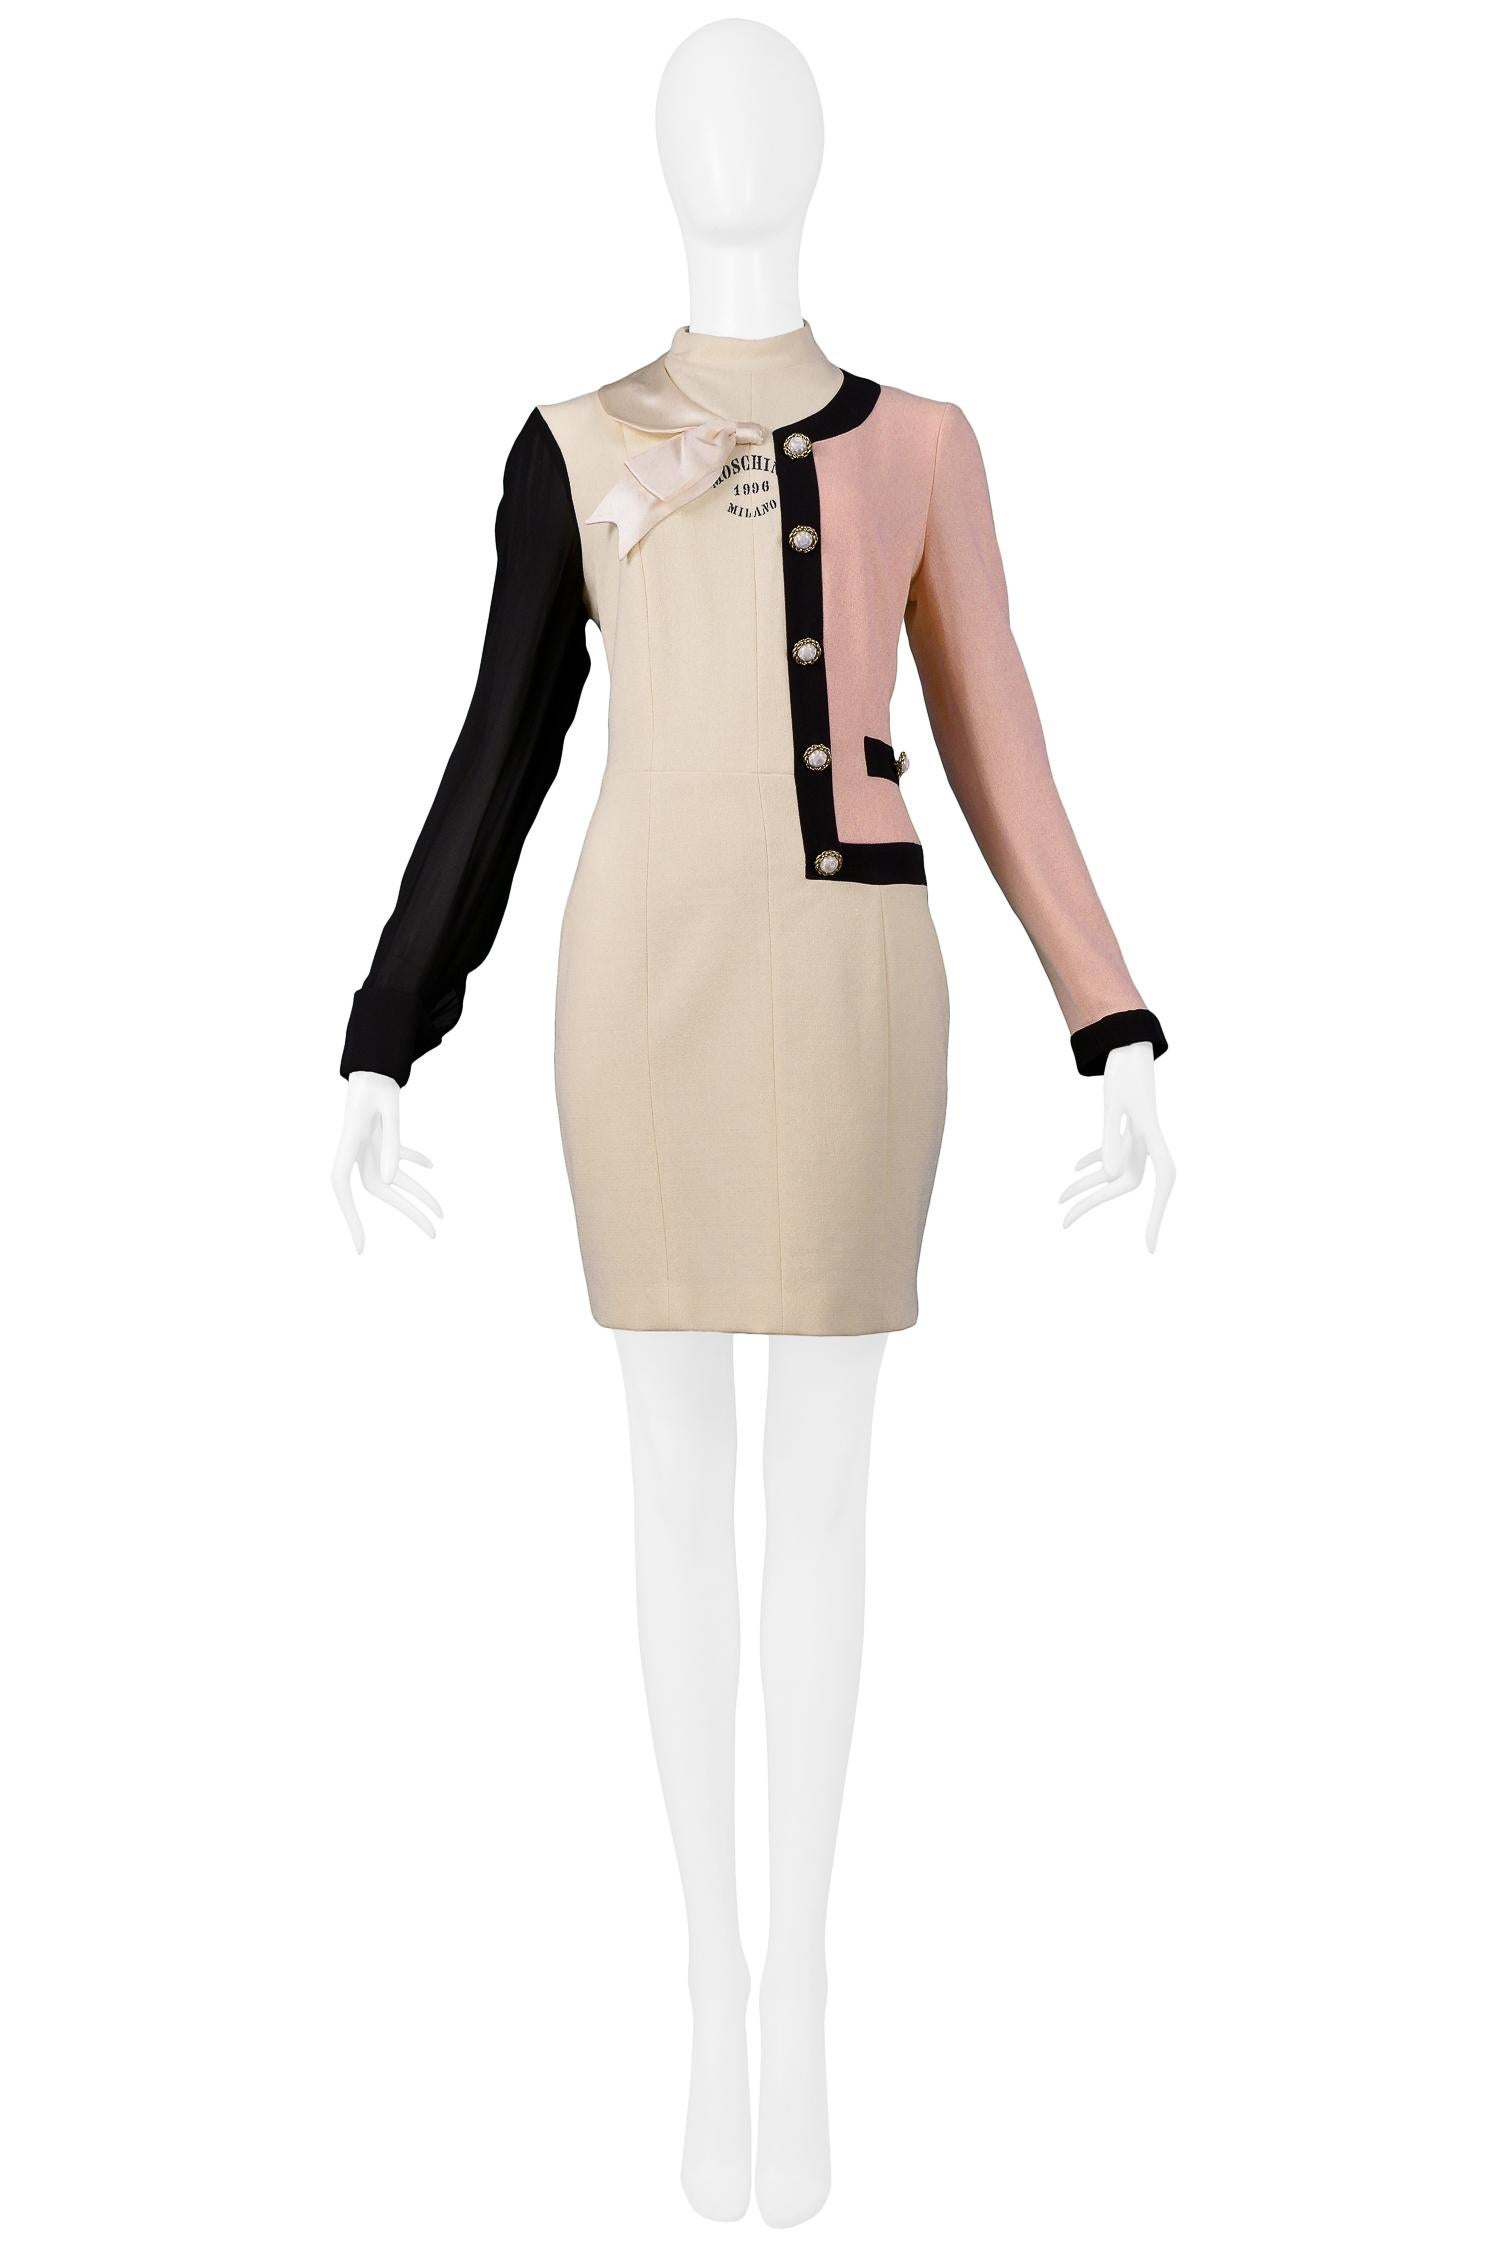 Resurrection Vintage is excited to offer a vintage 1990s Moschino Trompe l'oeil dress. The dress features half of a pink Chanel inspired suit jacket with black trim and pearl buttons, a black sleeve, a high collar, satin bow, an invisible center